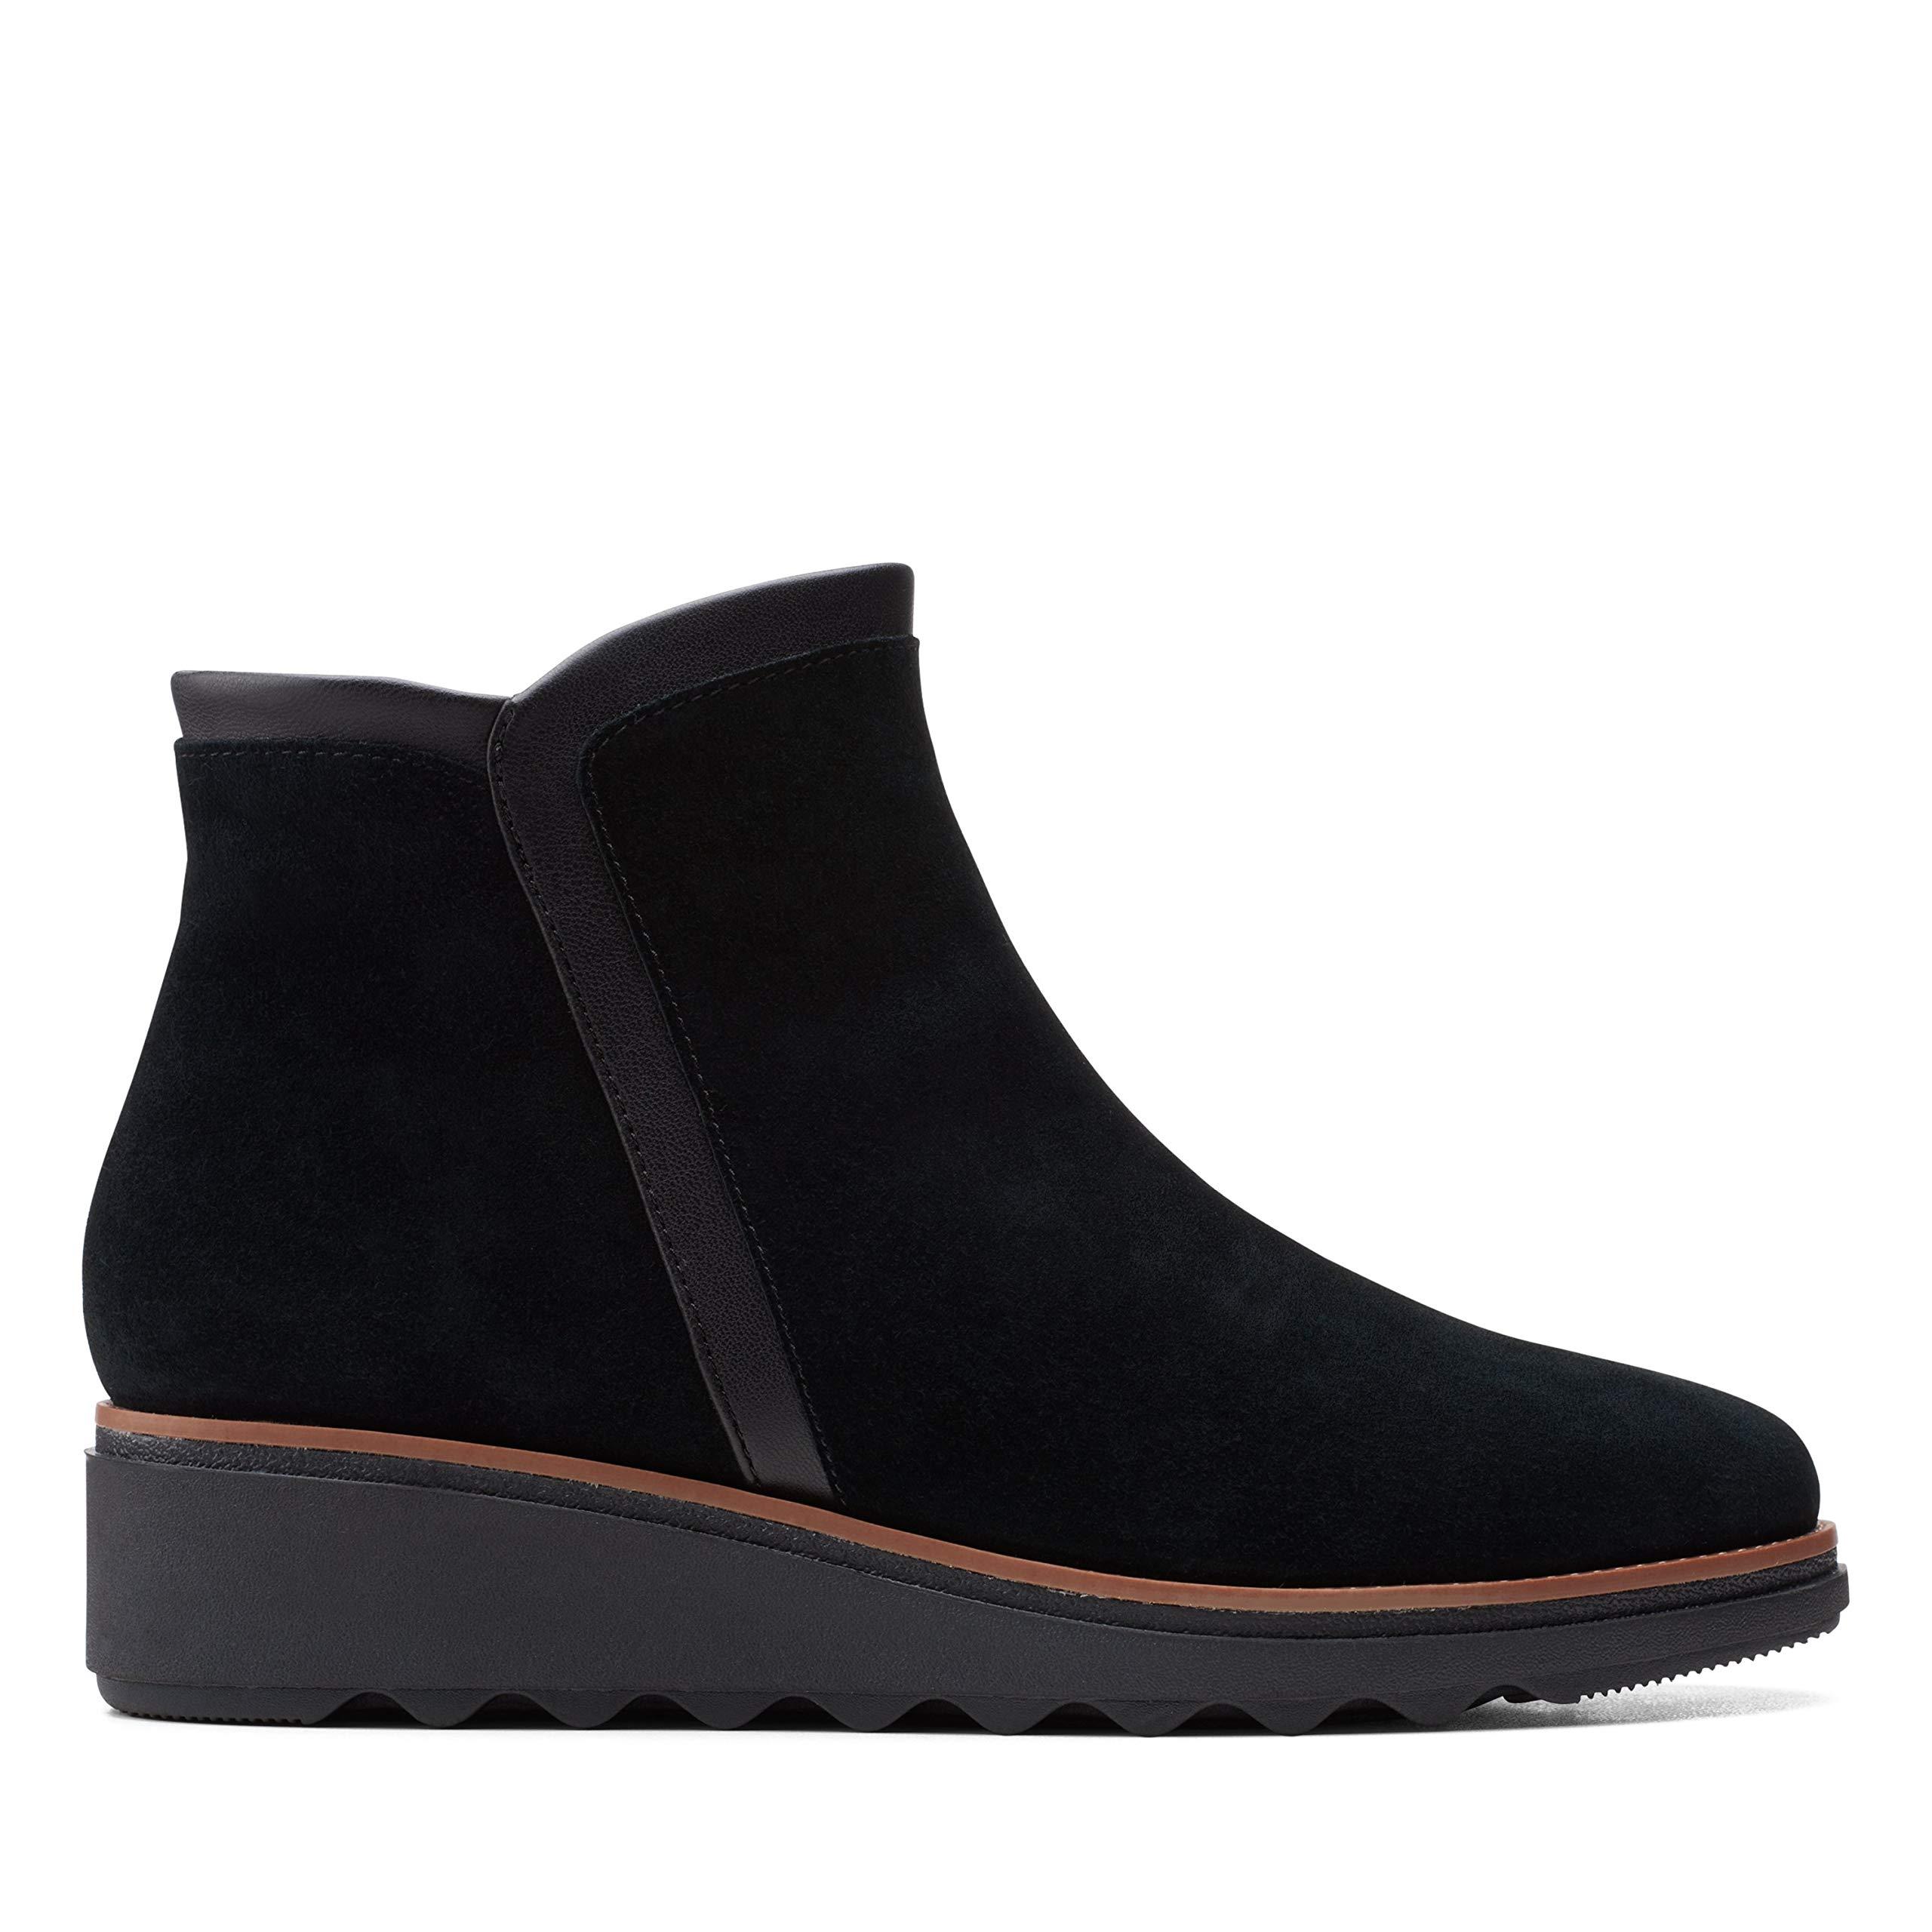 Clarks Suede S Sharon Heights Boots in Black Suede (Black) - Save 78% |  Lyst UK